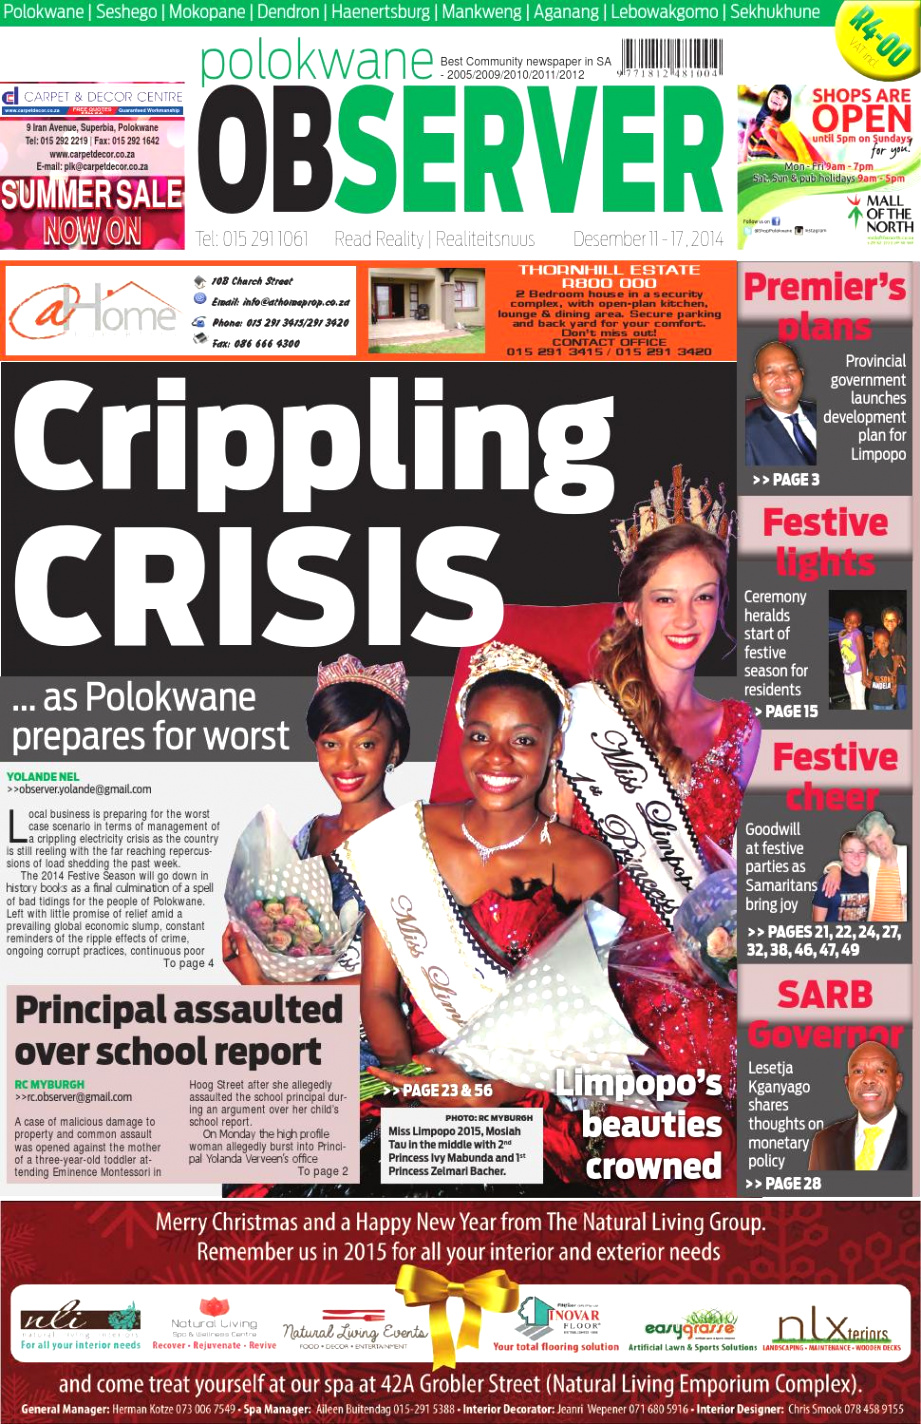 Personil Injury Lawyer In Martin Mn Dans Polokwane Observer 11 December 2014 by Polokwane Observer - issuu